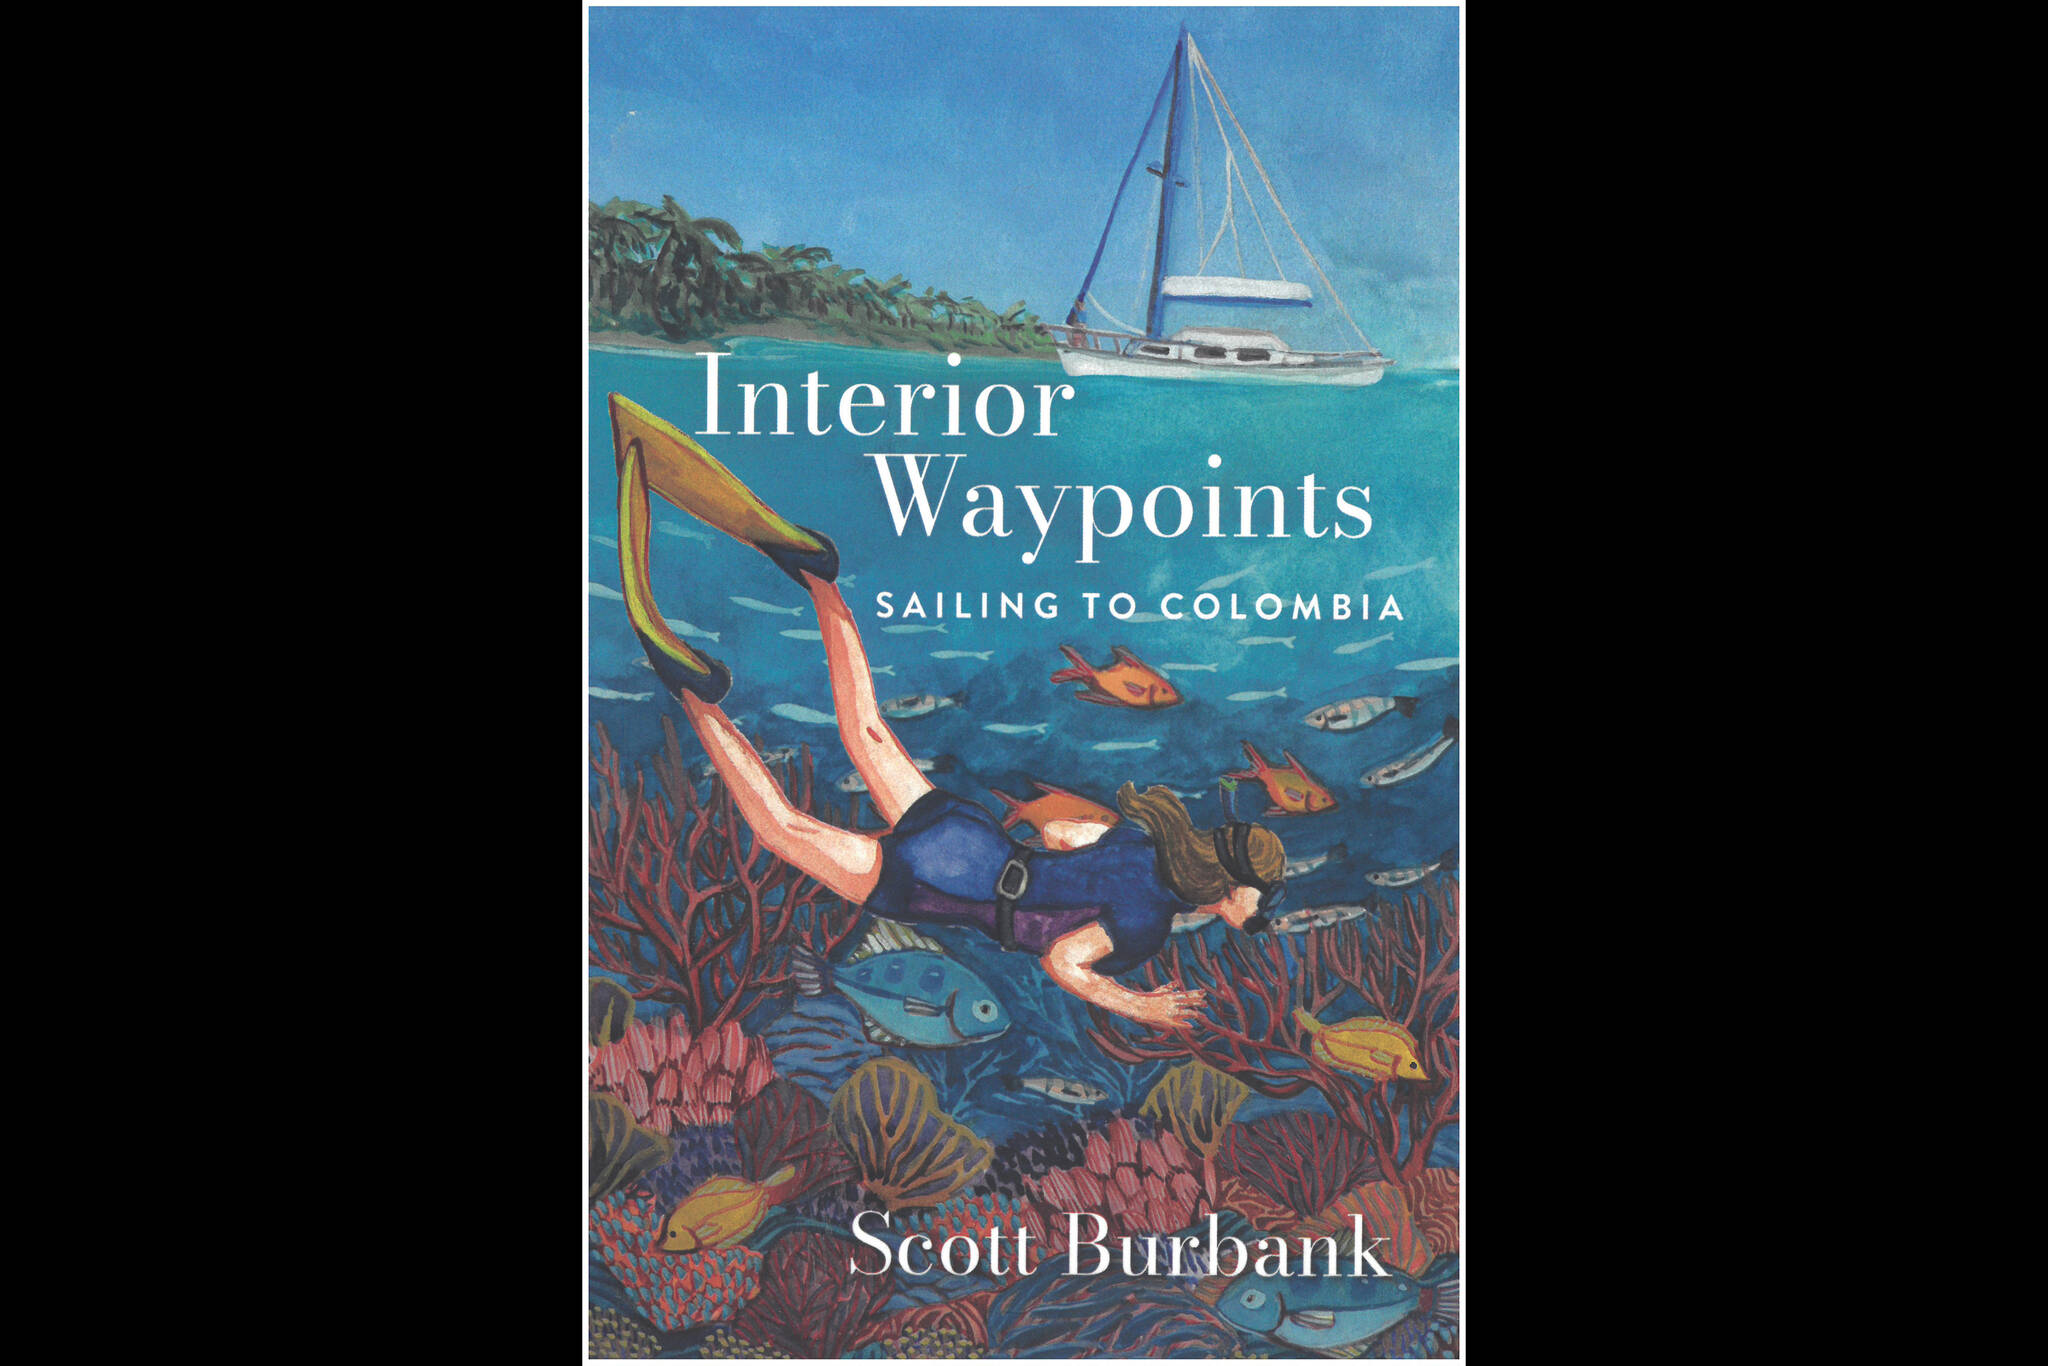 Homer artist Oceana Wills illustrated the cover of Scott Burbank's "Interior Waypoints: Sailing to Colombia."